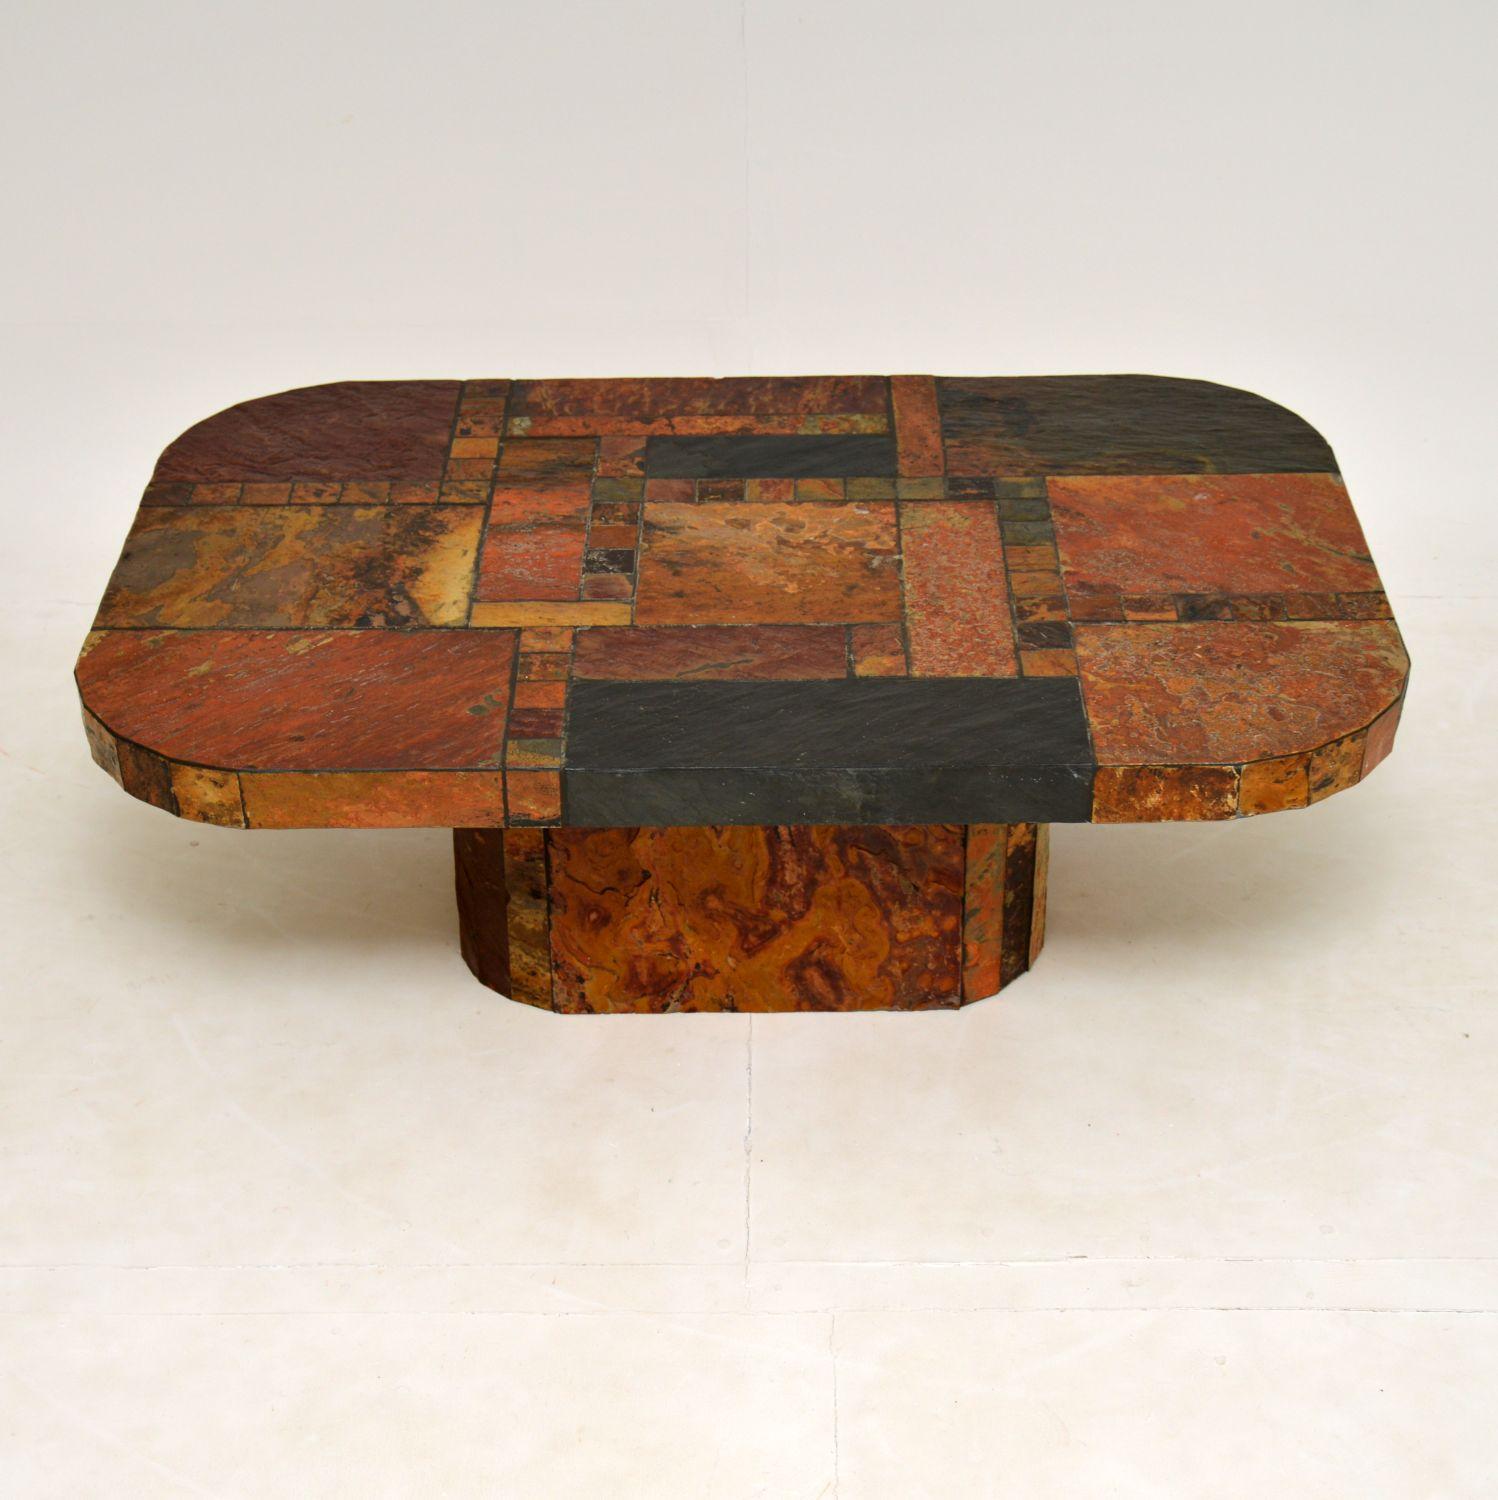 A large and impressive vintage stone coffee table, recently imported from Sweden. This dates from around the 1970-80’s.

It is of amazing quality and is extremely striking. We have never seen one like this before! It is made from a patch work of